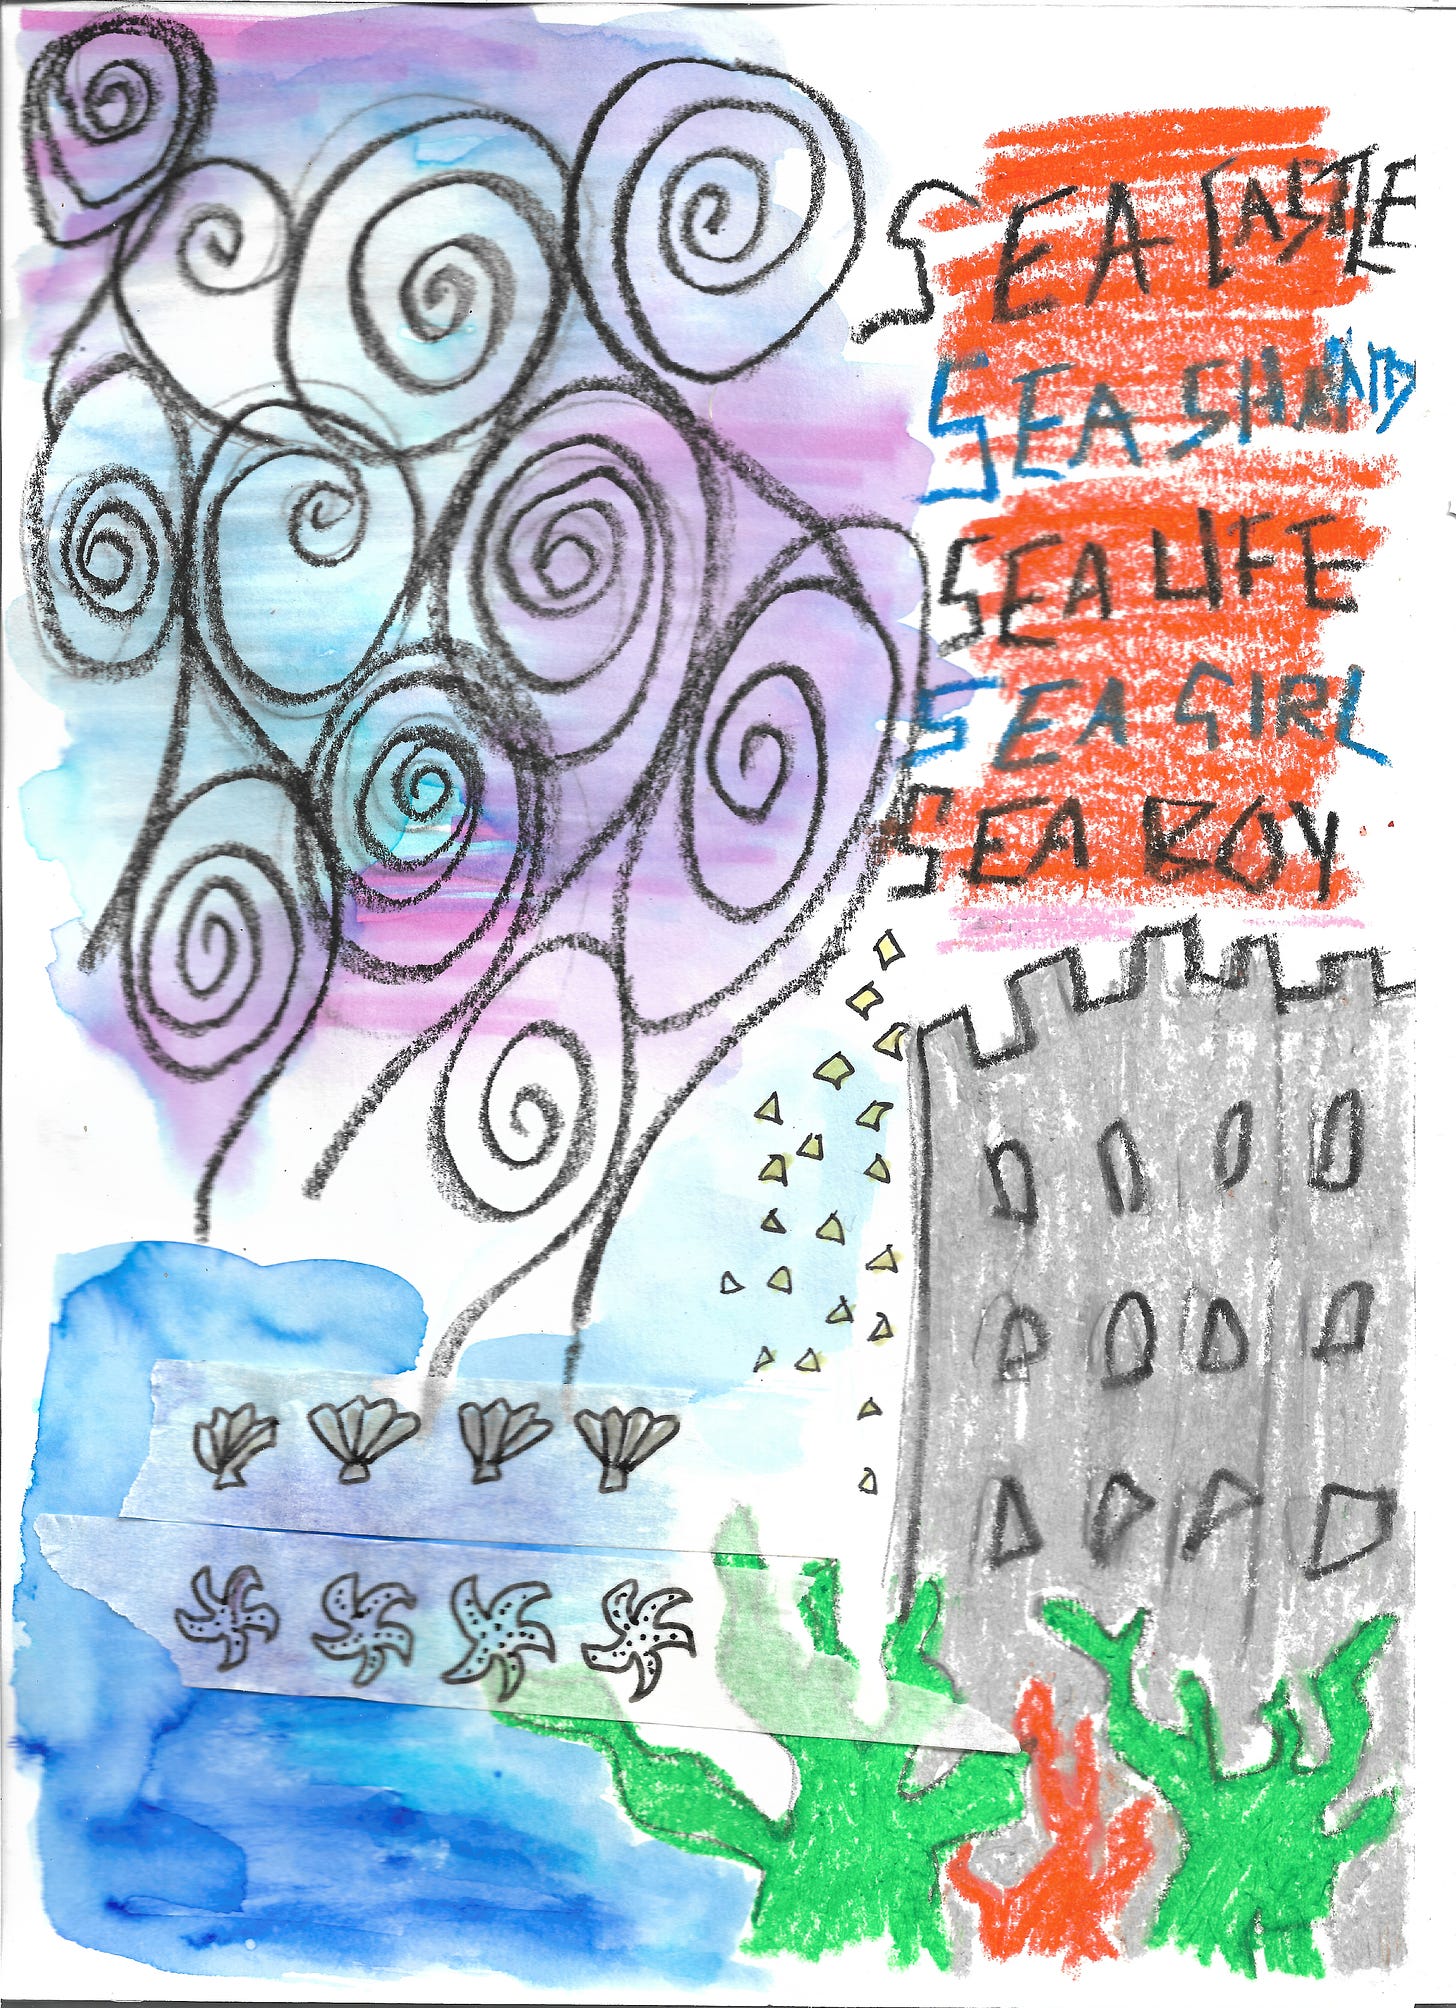 A colourful pencil and watercolour abstract drawing of swirls and shells, seaweed and castles. There is writing that says: "SEA CASTLE SEA WEED SEA LIFE SEA BOY SEA GIRL"